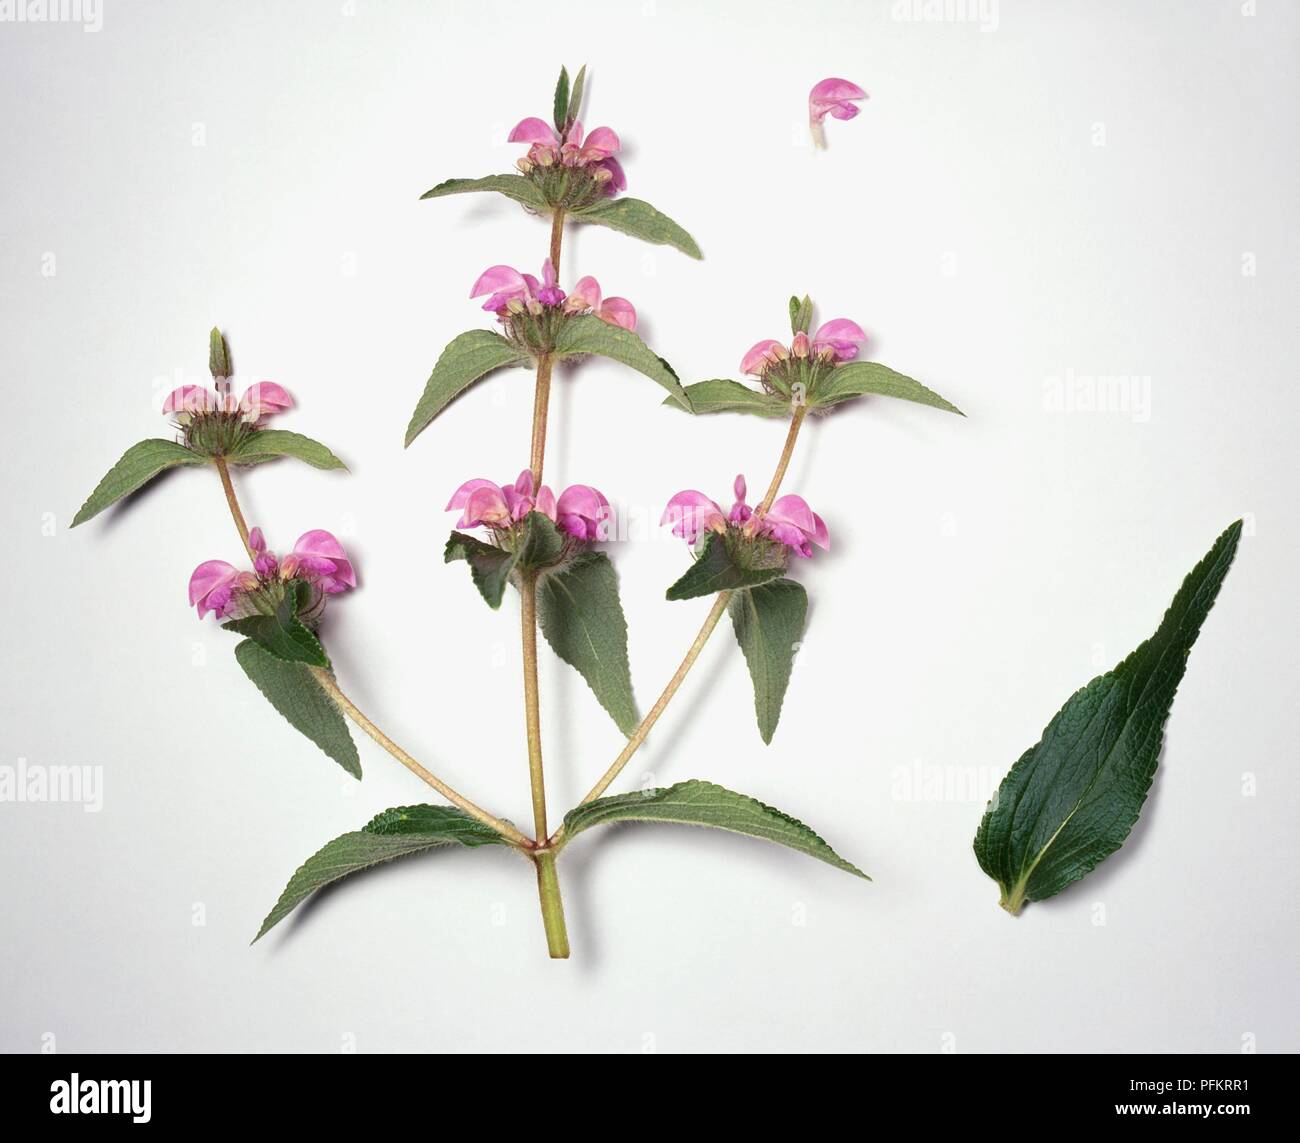 Phlomis herba-venti with small pink flowers and pointed green leaves on long, thin stems, and separate leaf Stock Photo